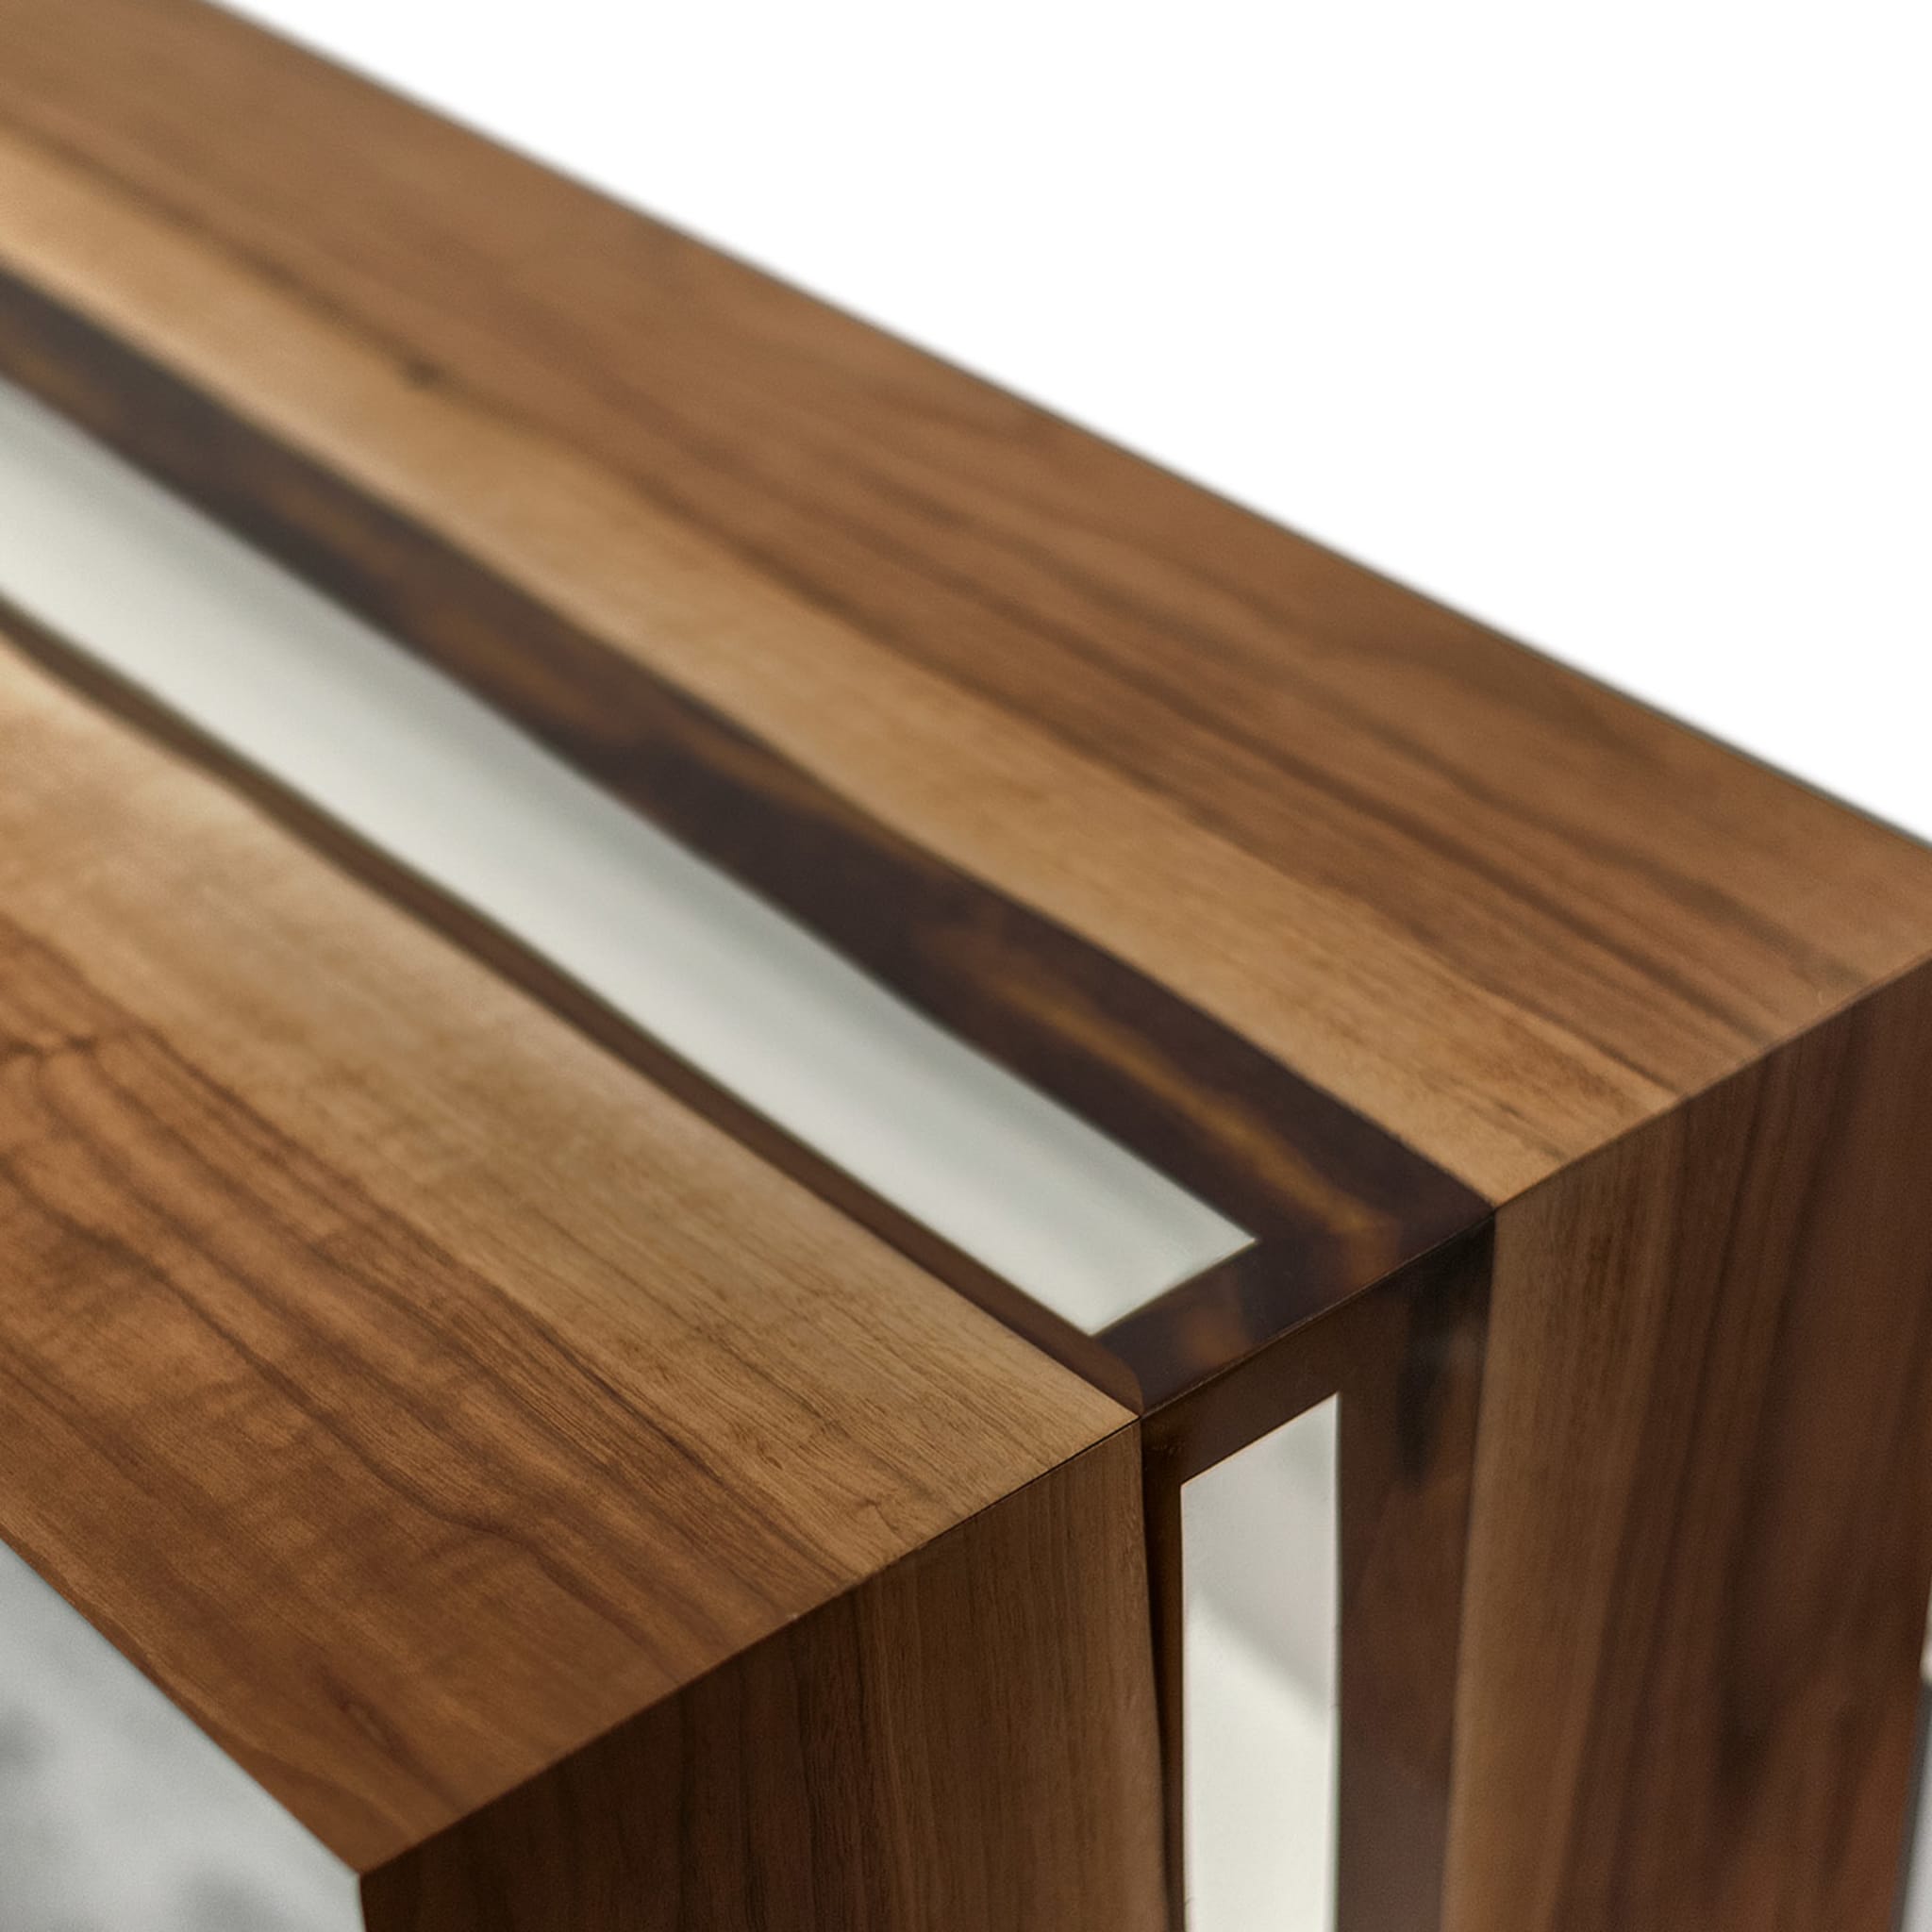 Frame Resin Walnut Console by C.R. & S. Riva 1920 - Alternative view 1